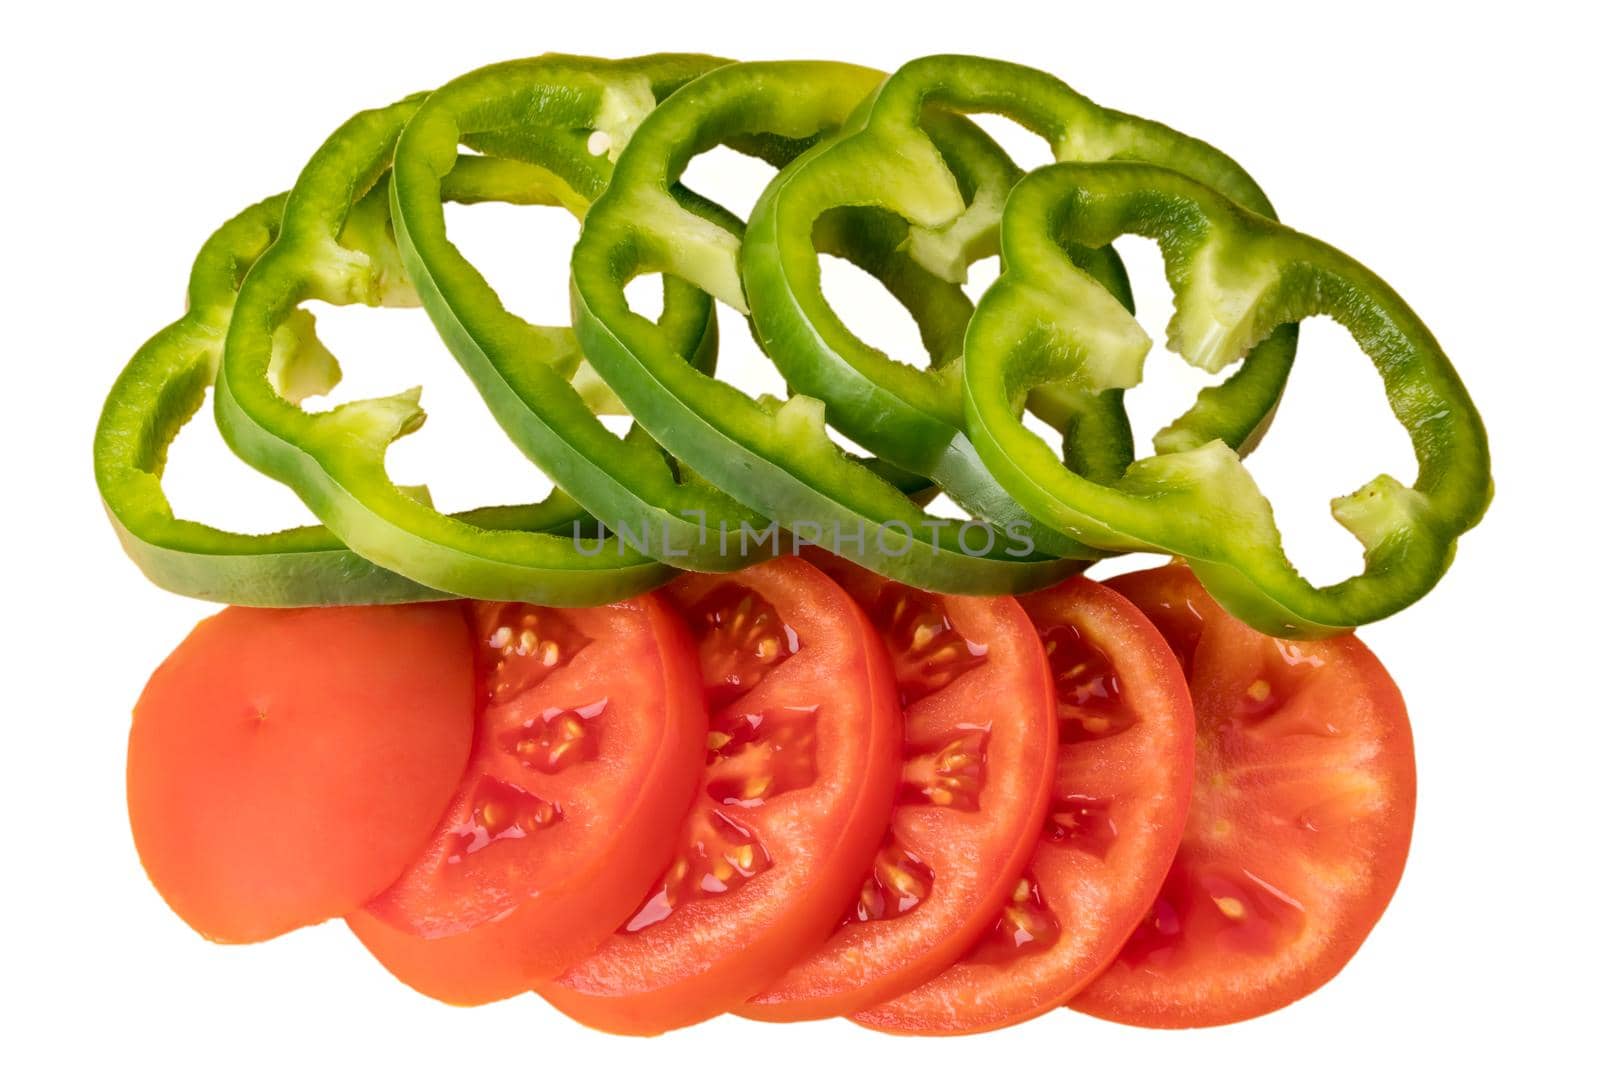 Tomatoes and paprika cut into slices, slices on a white background in isolation by A_A